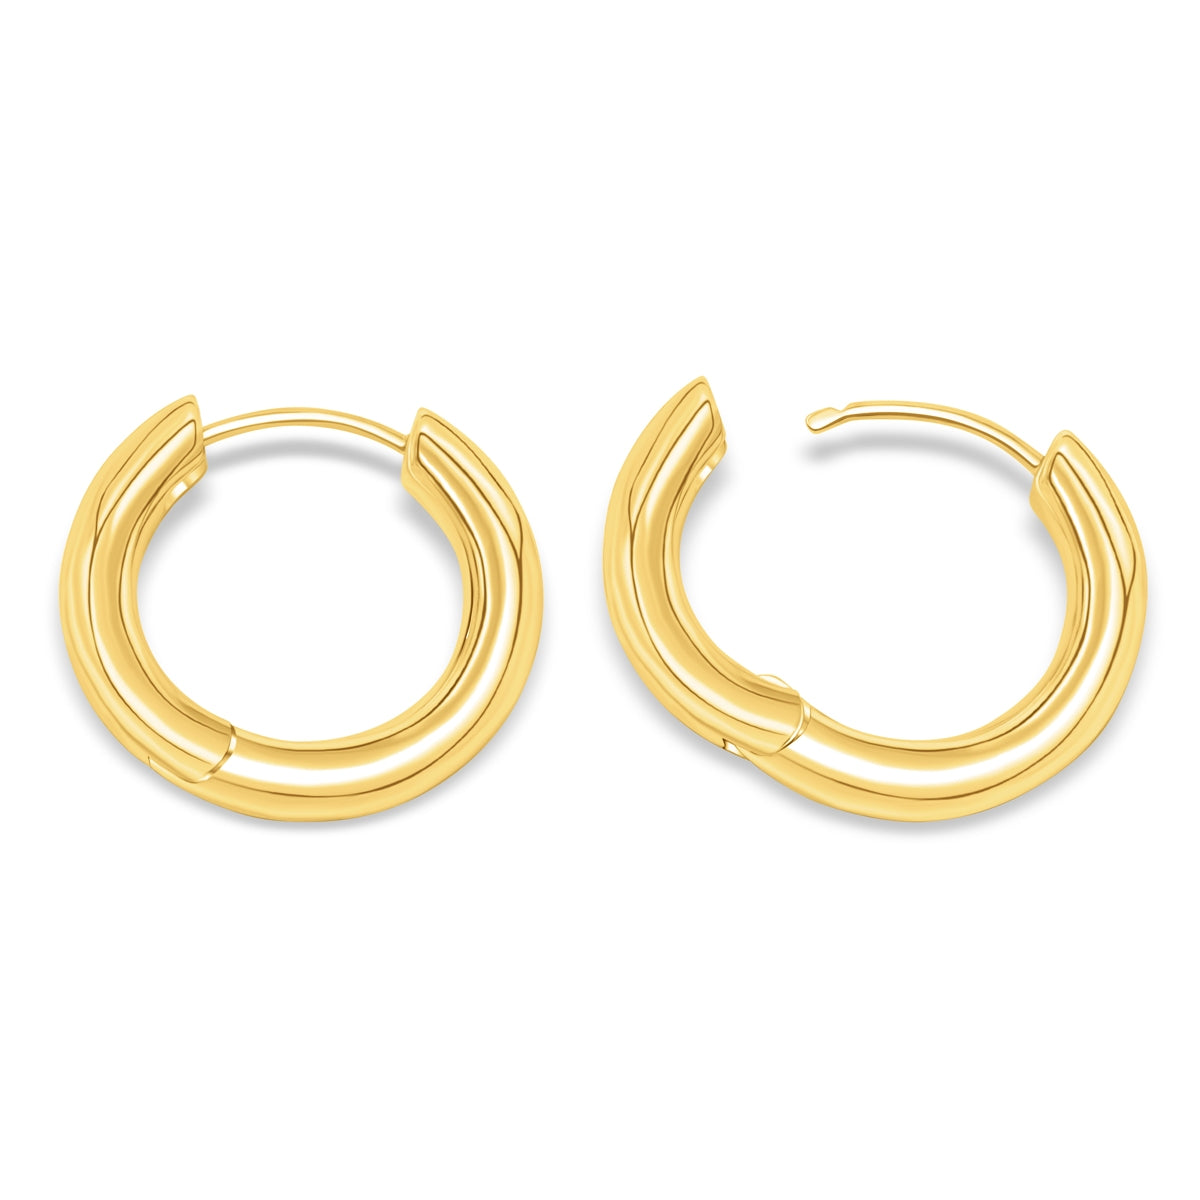 Simple thick gold plated hoop earrings